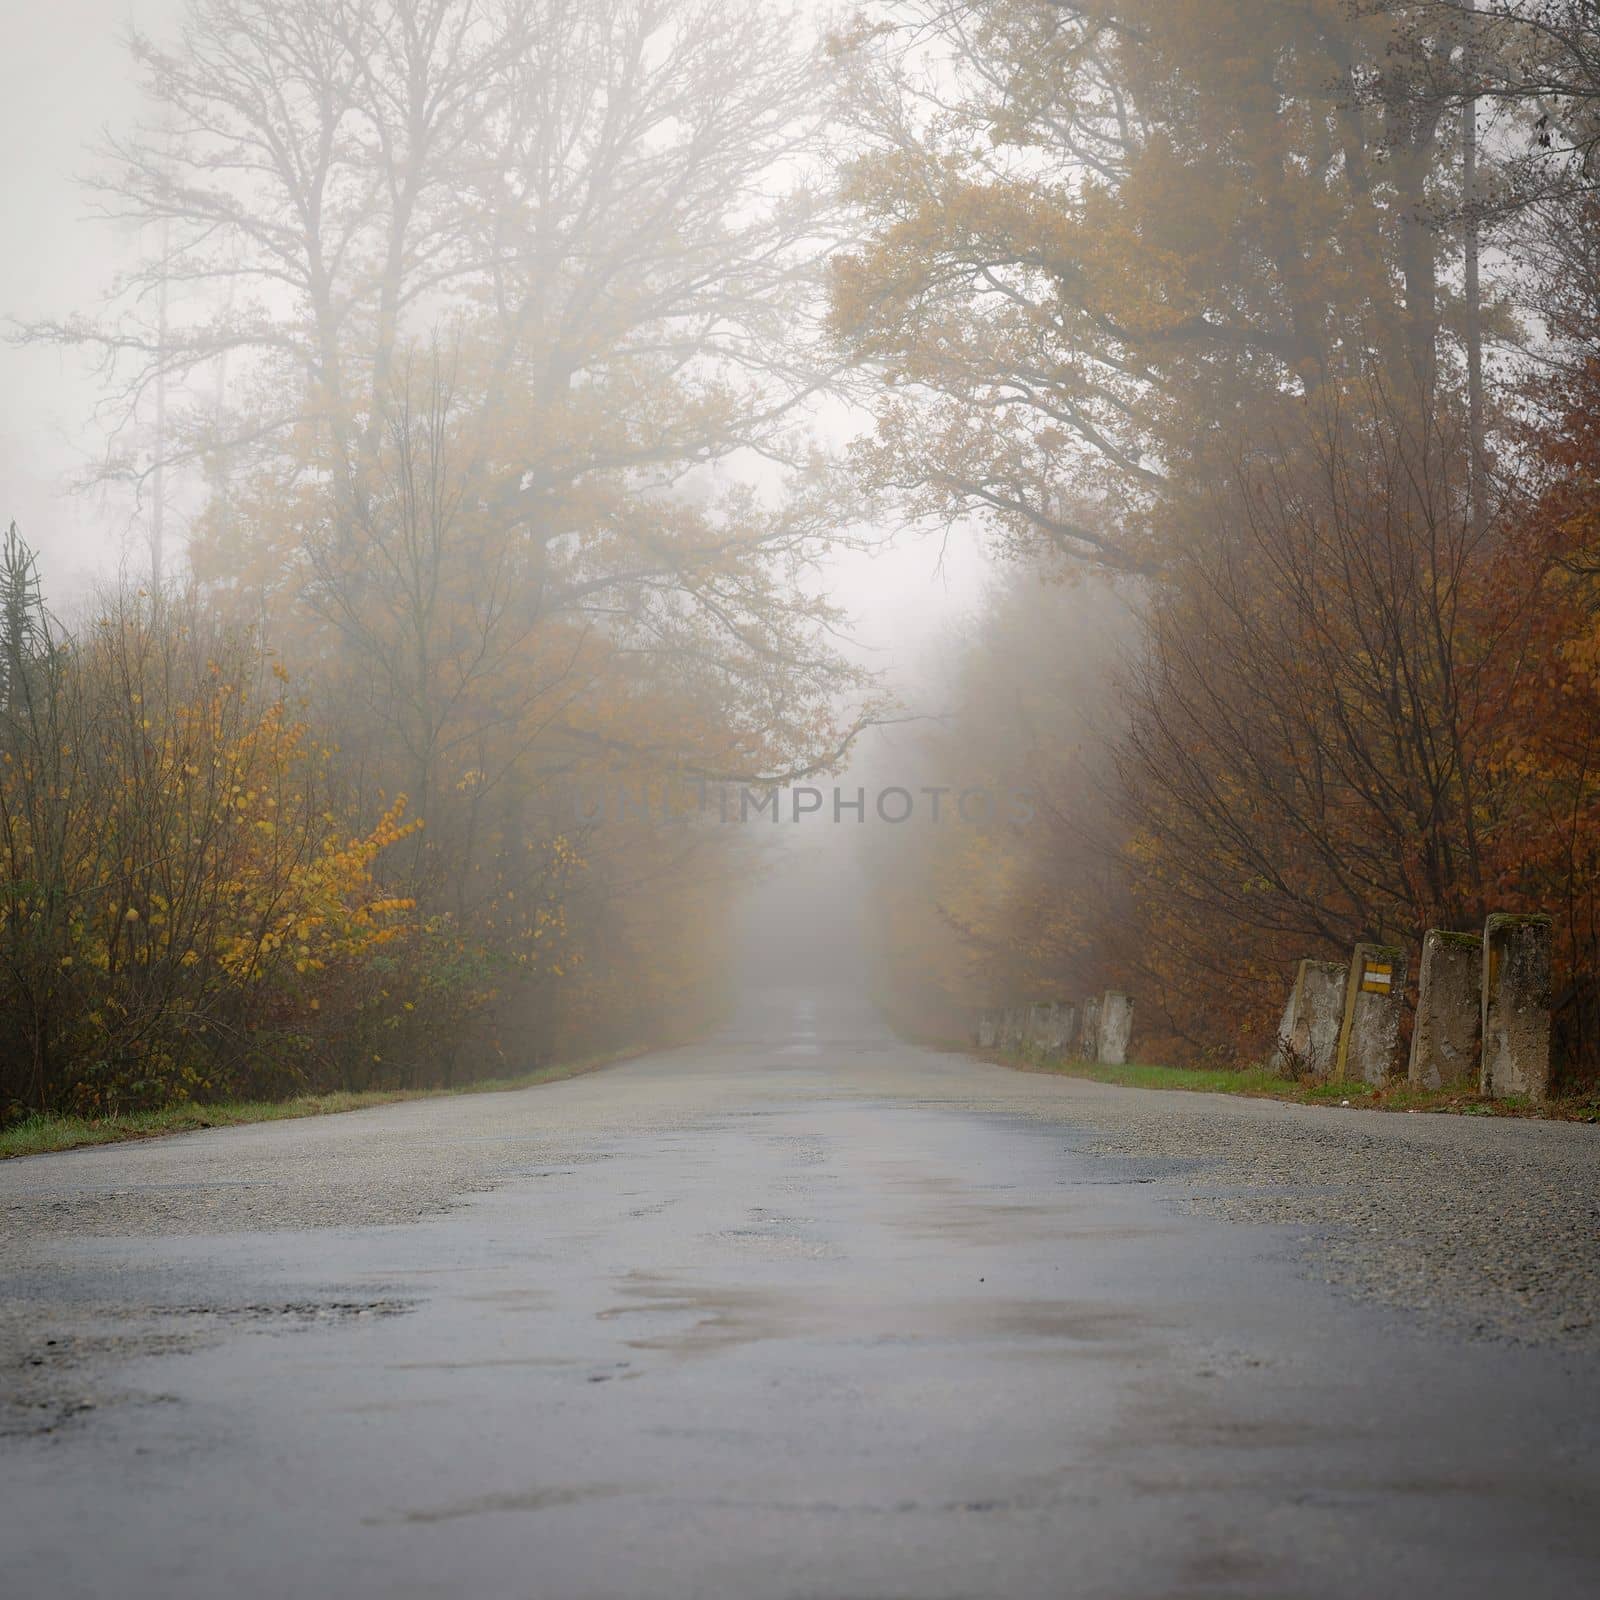 Road in autumn. Foggy and dangerous car driving in the winter season. Bad weather with rain and traffic on the road. Concept for traffic and road safety.